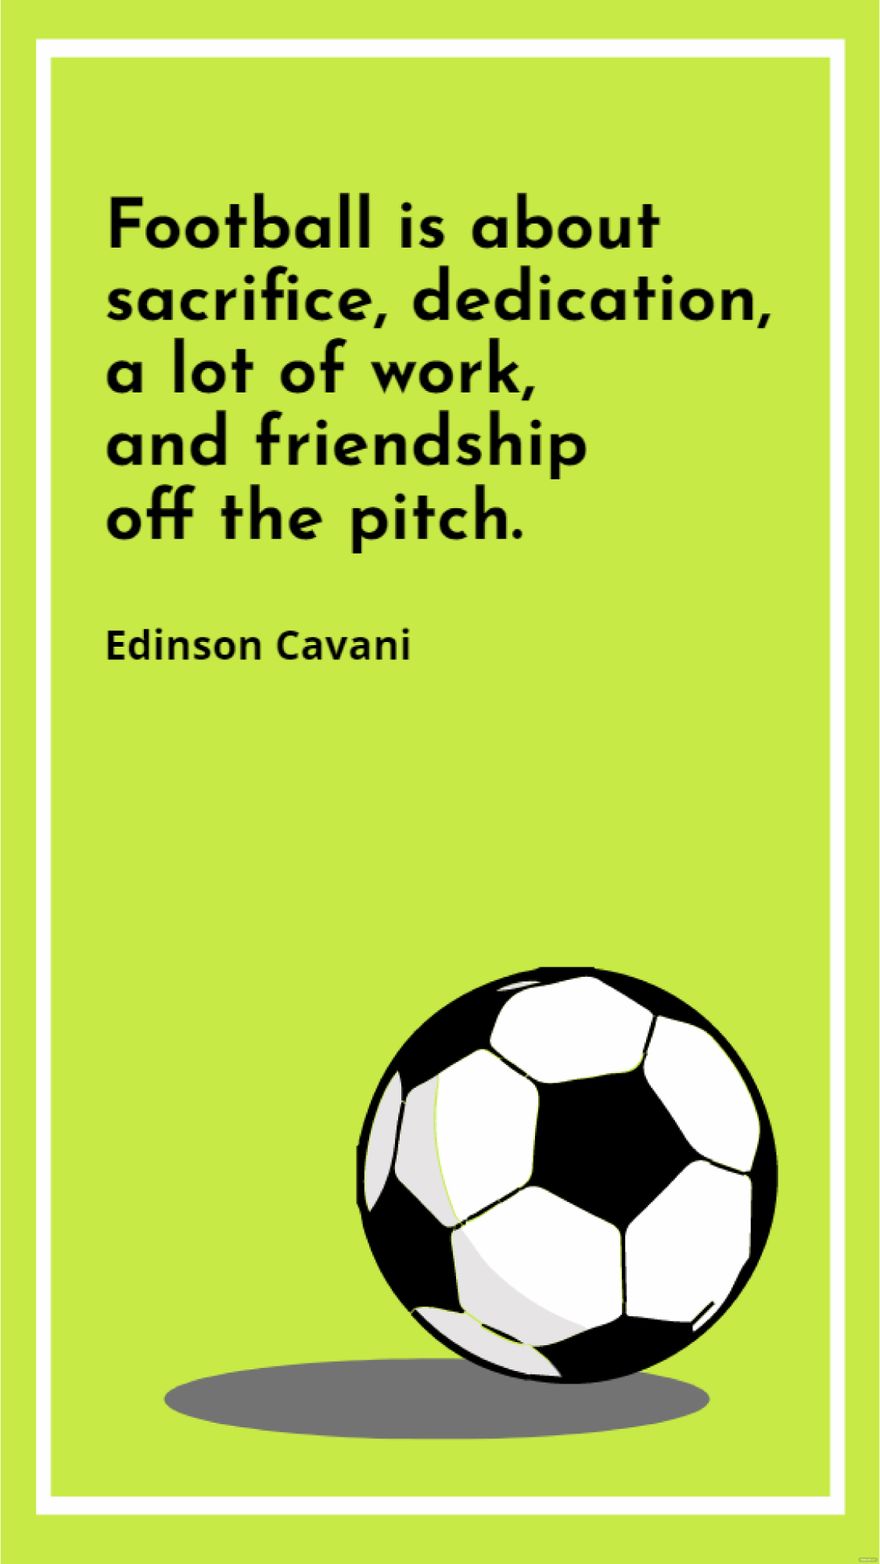 Edinson Cavani  Football is about sacrifice dedication a lot of work and friendship off the pitch